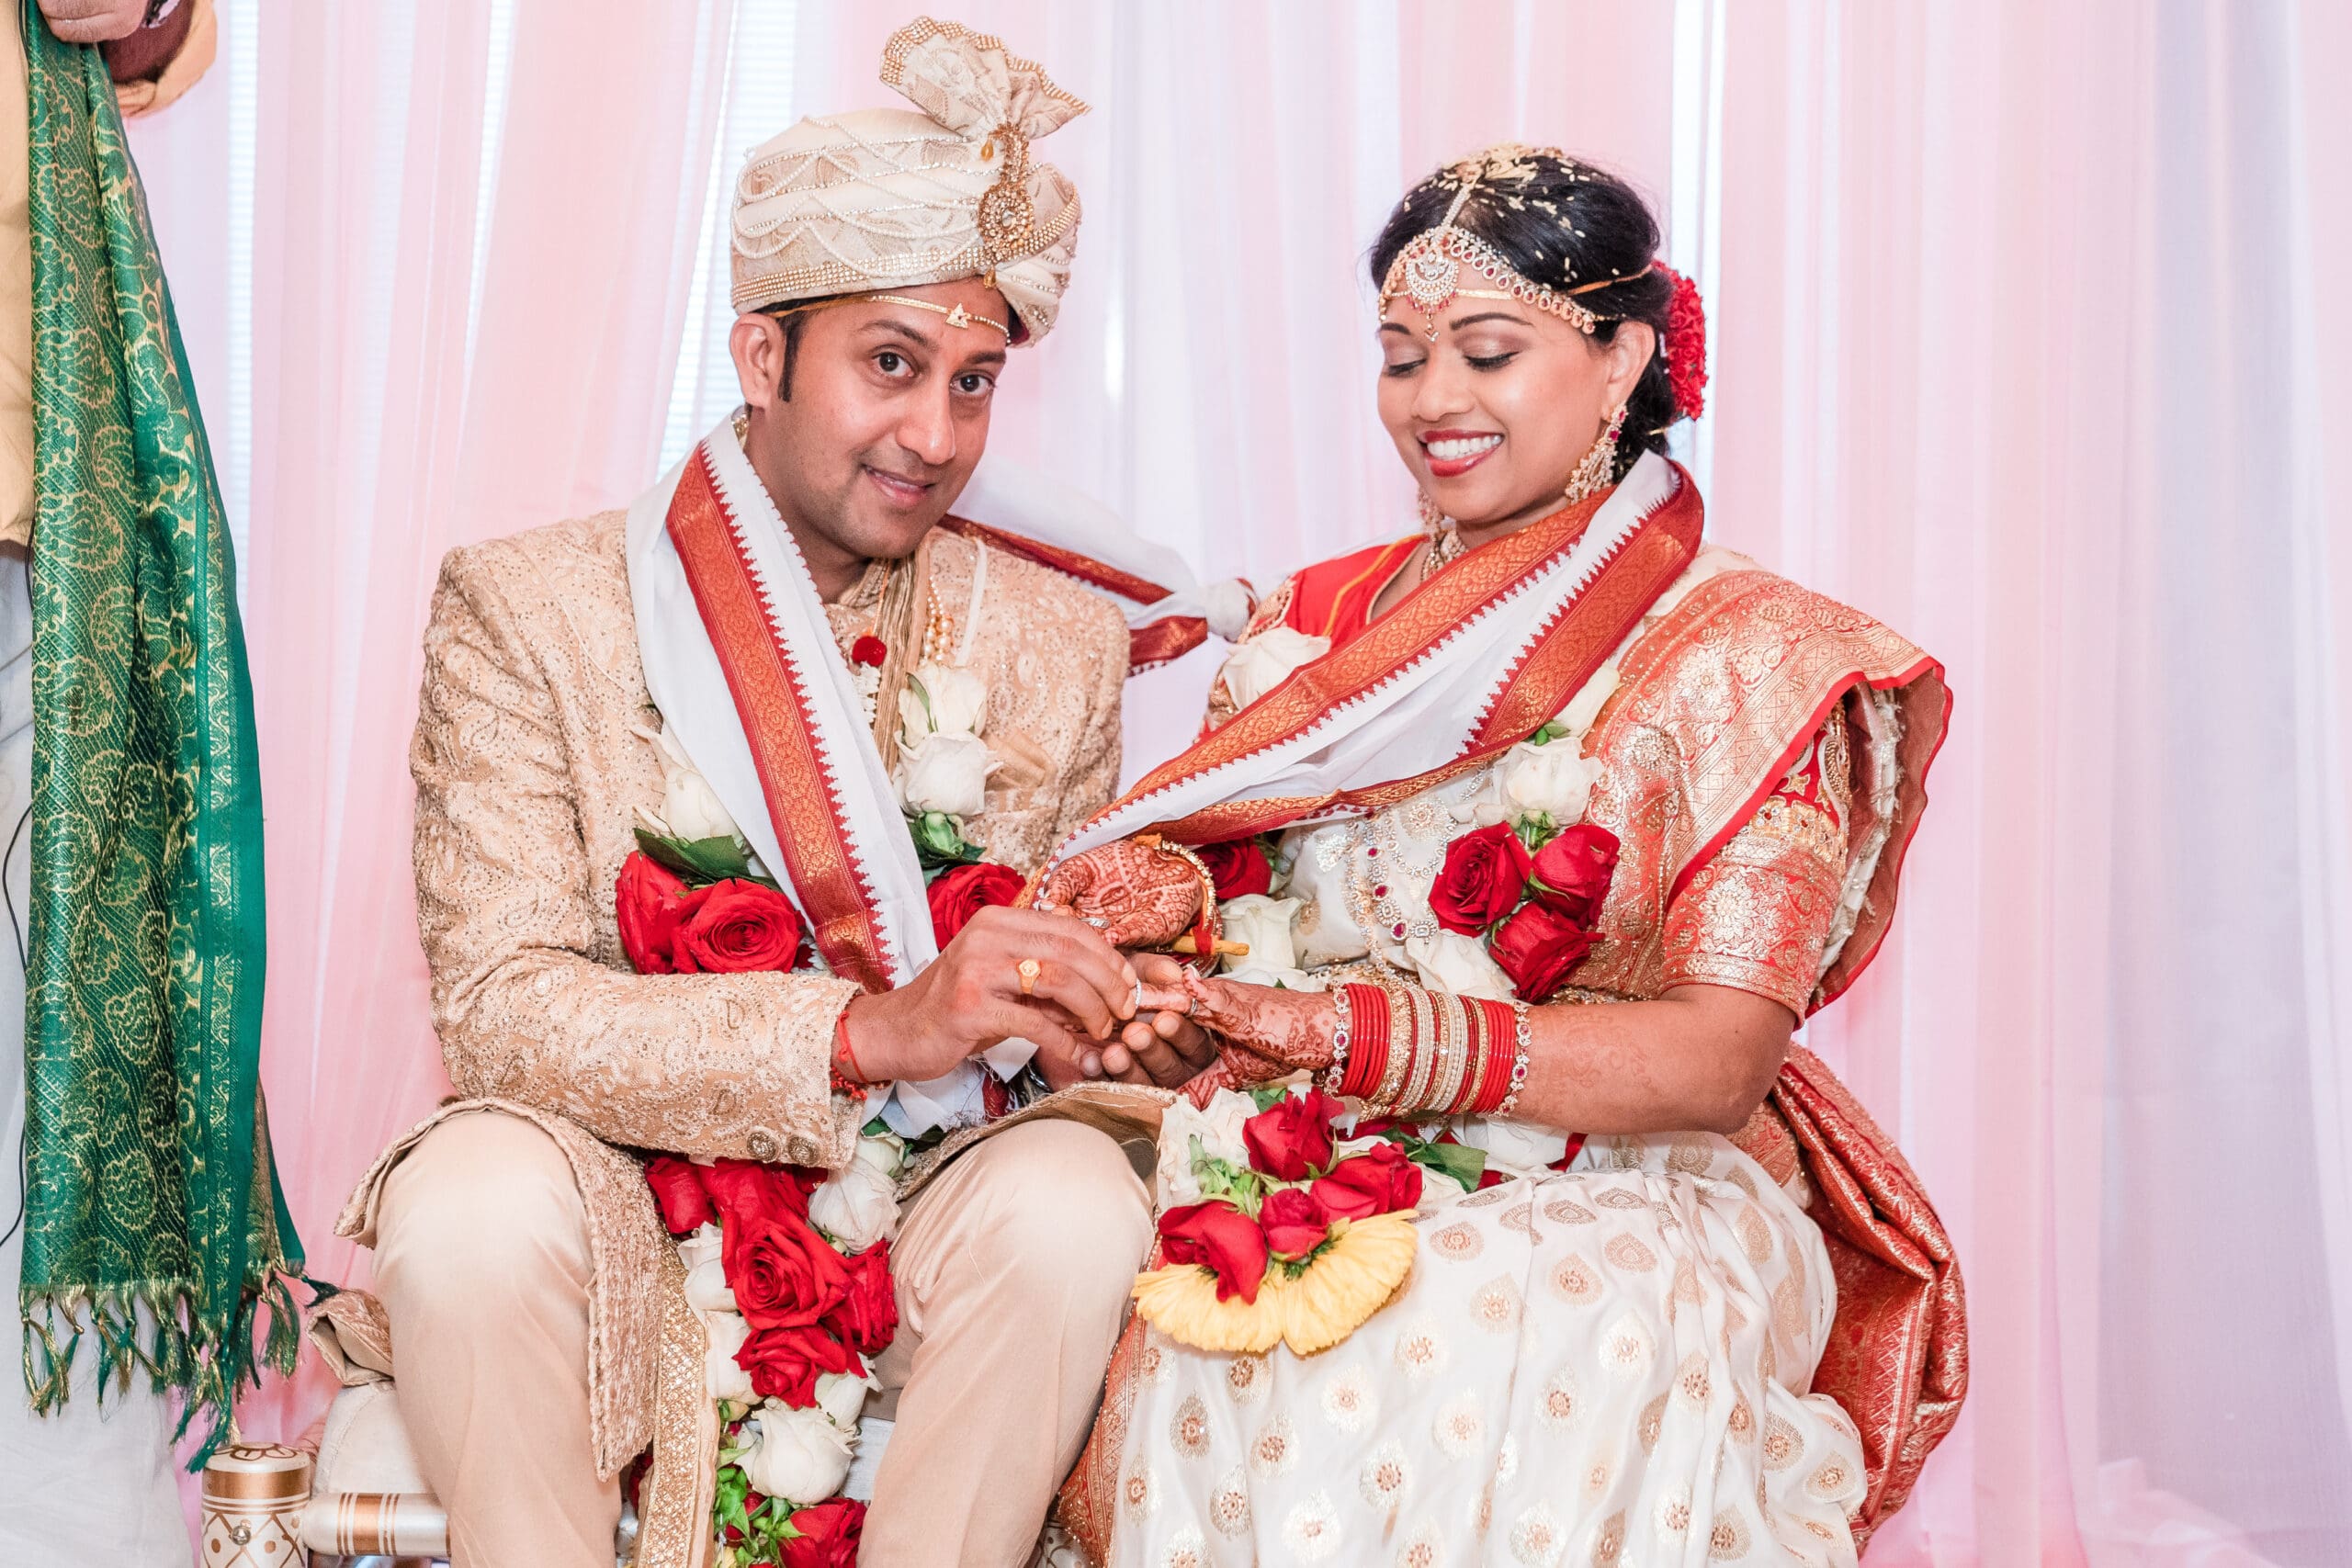 Smiling couple in traditional Indian wedding attire, the husband placing a ring on his bride's hand during the ceremony.